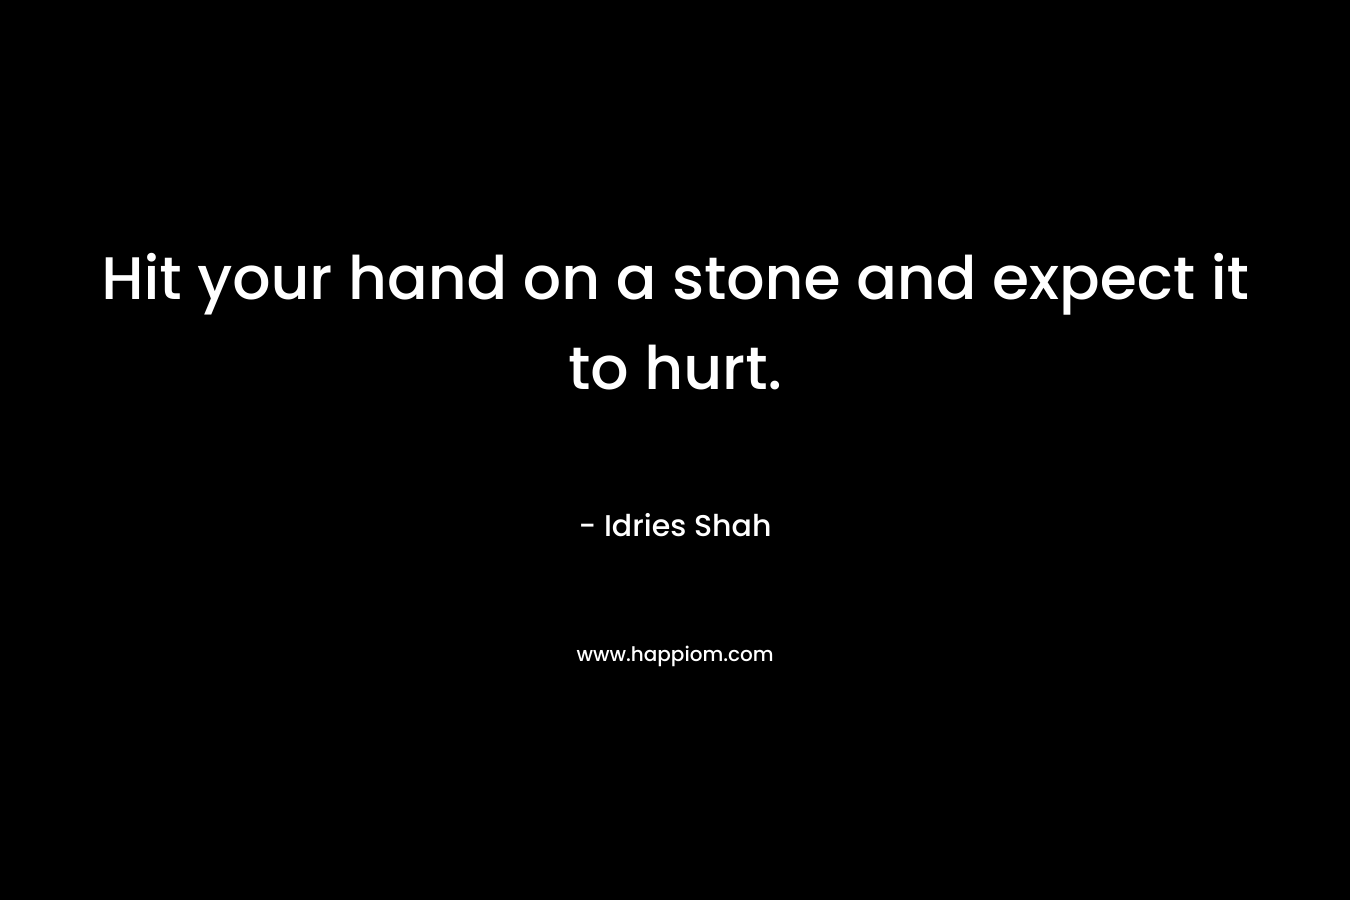 Hit your hand on a stone and expect it to hurt.